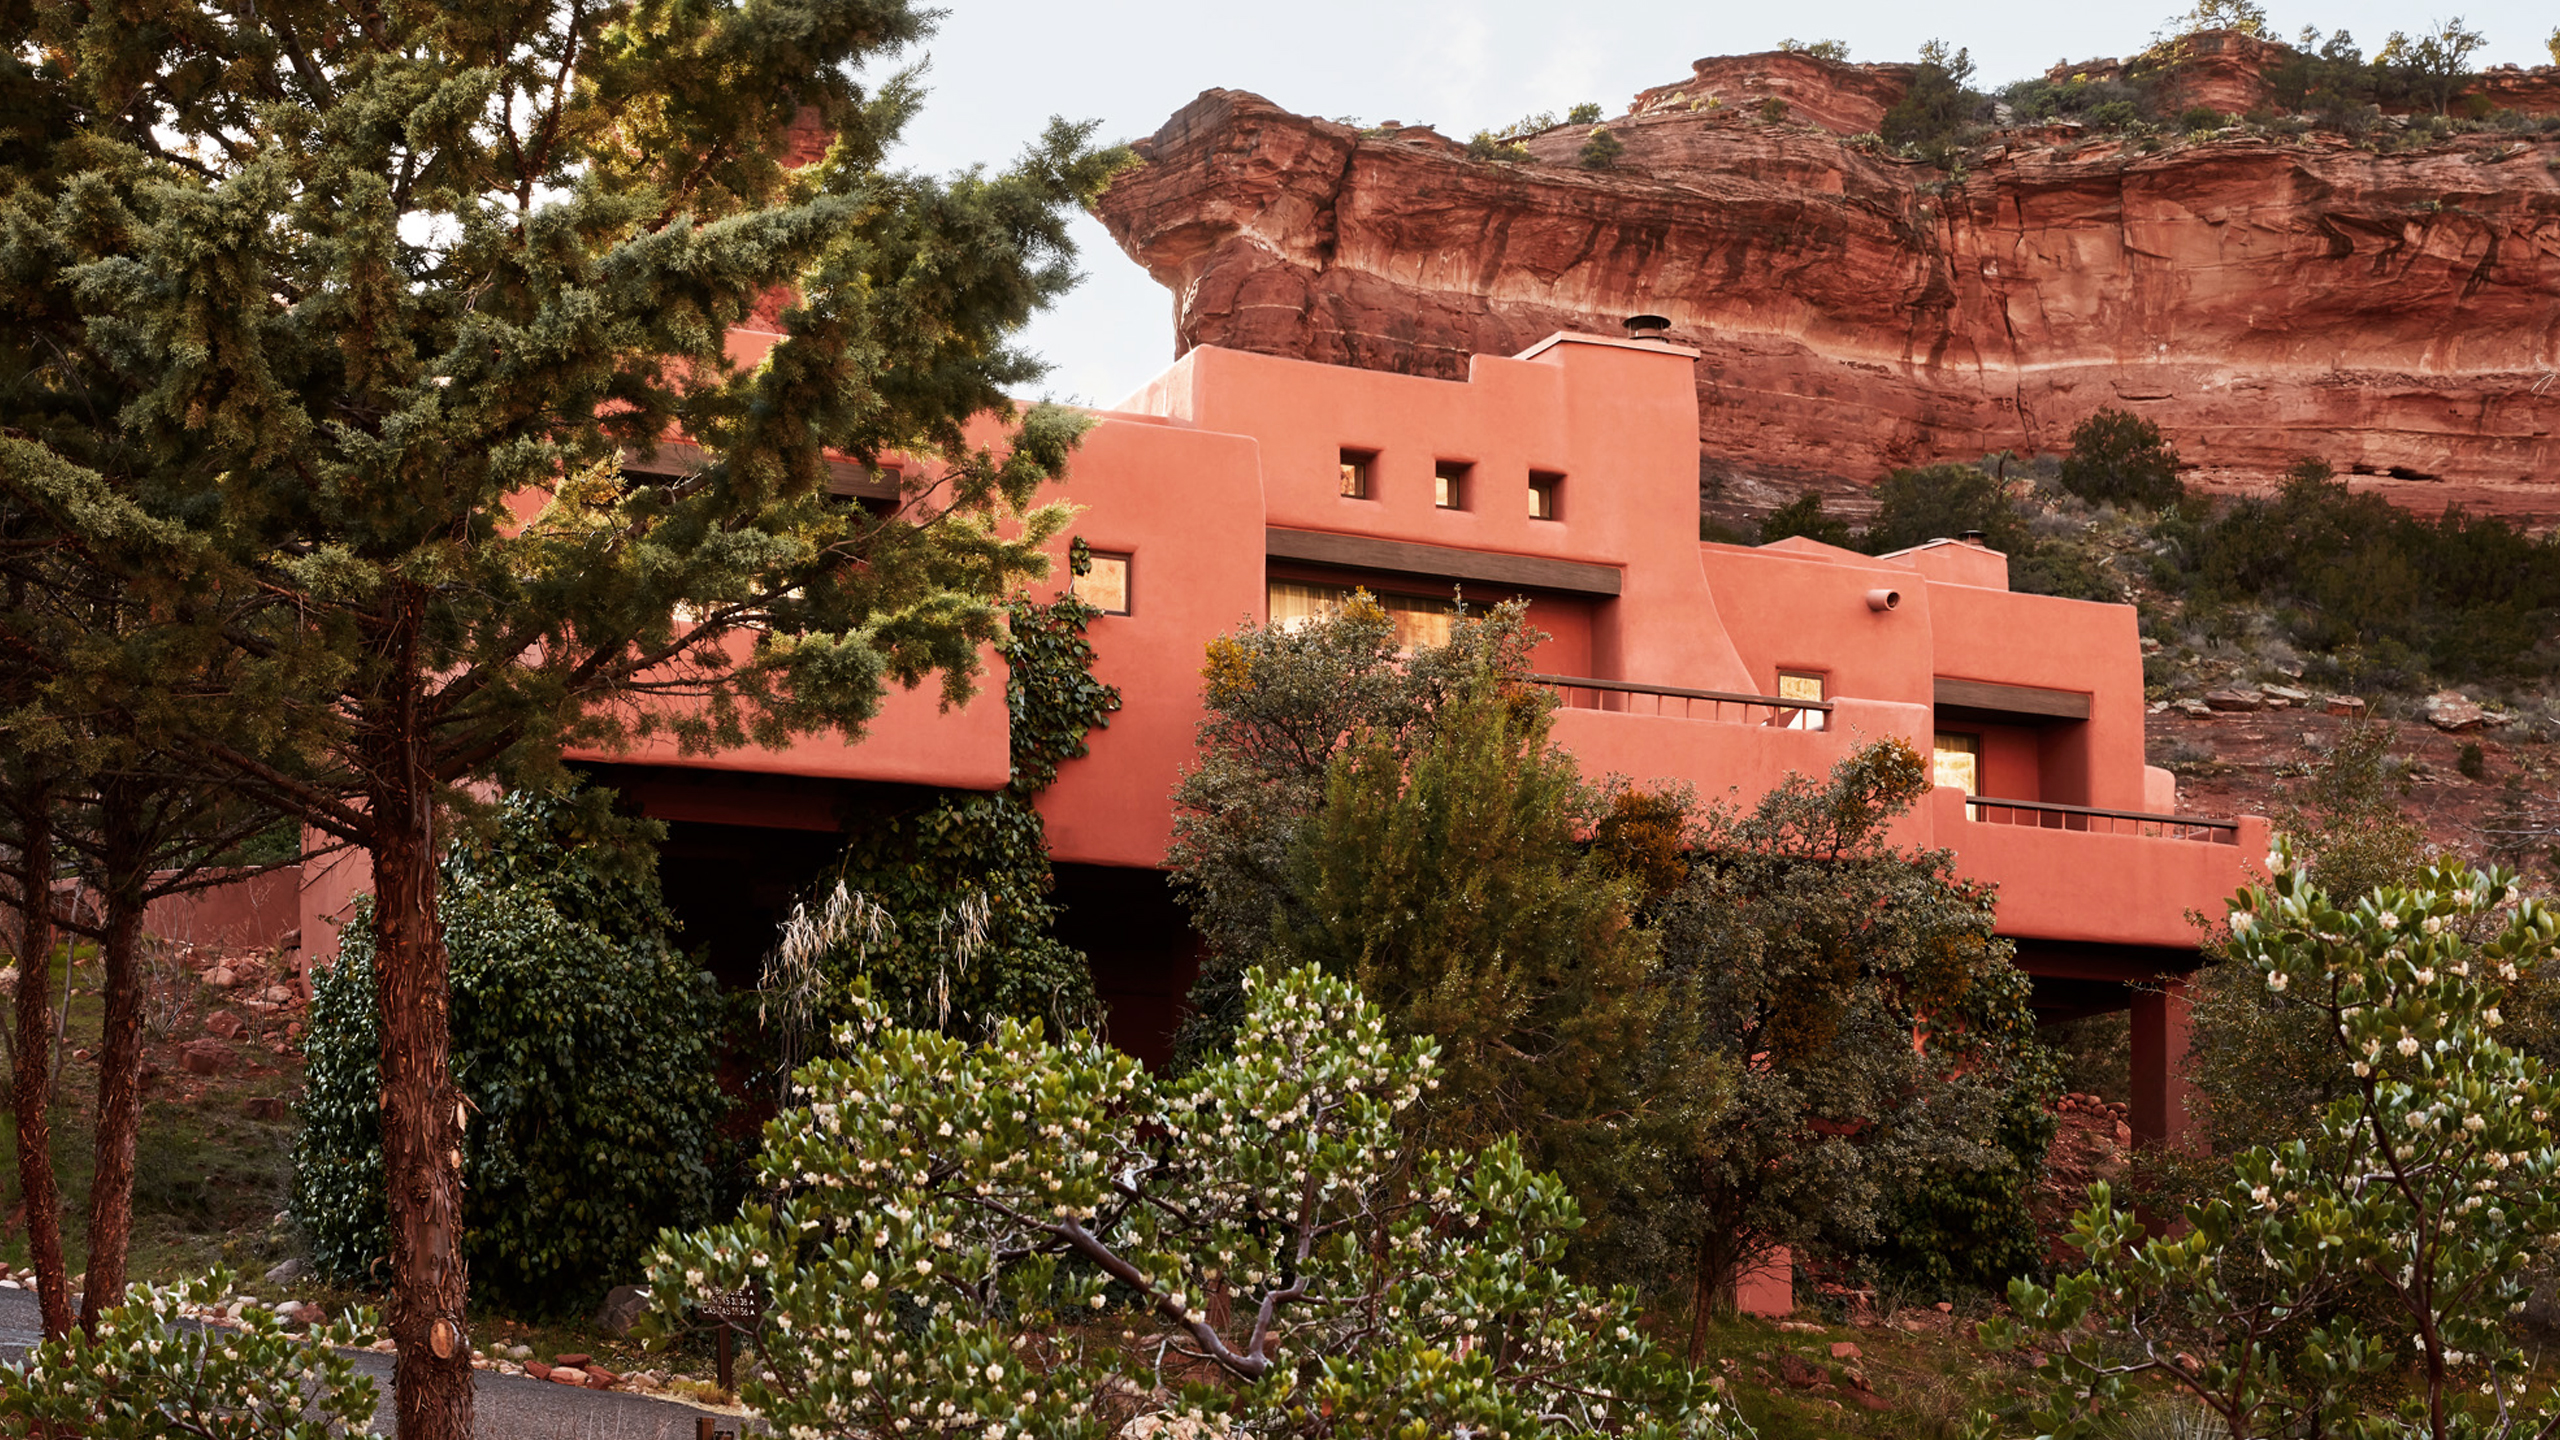 Red rock with casita in front and pine trees